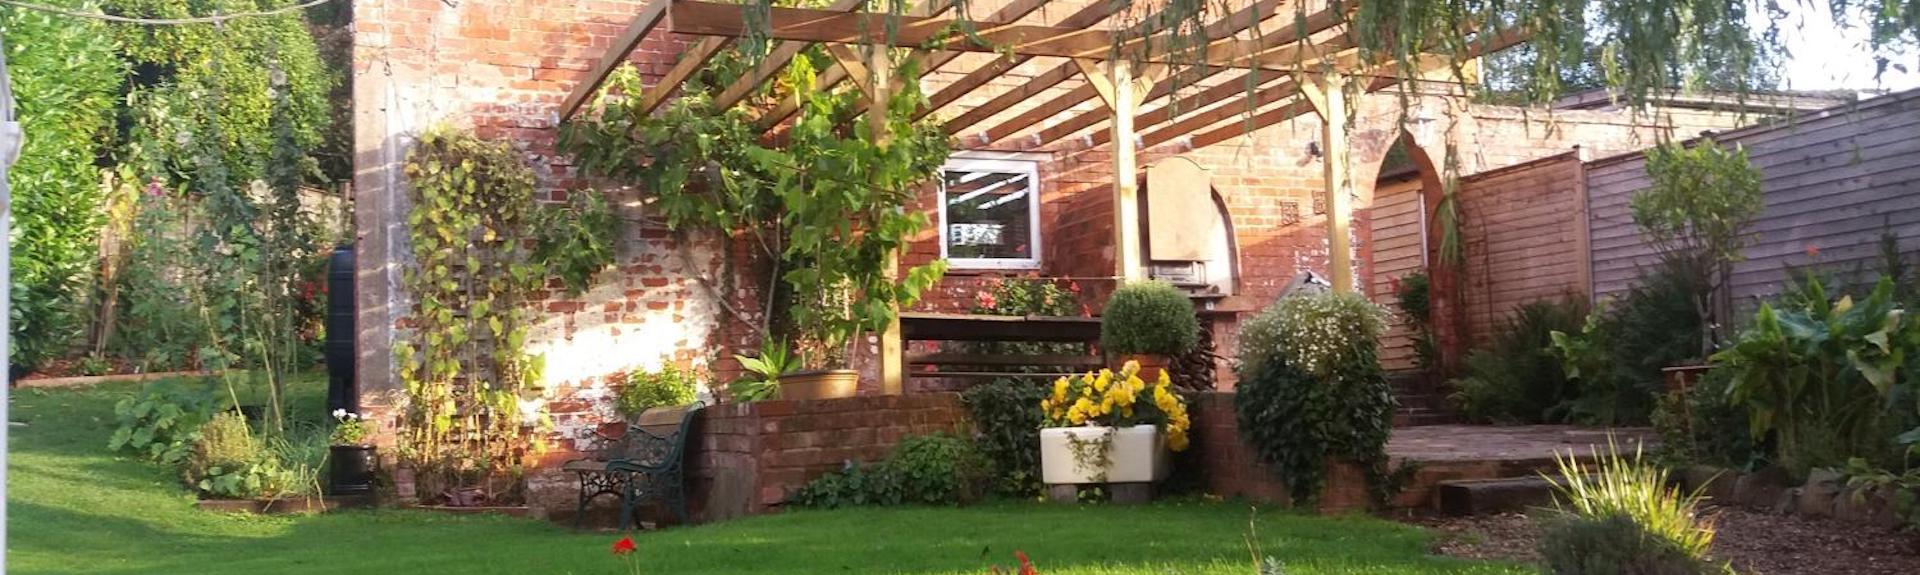 Exterior of a single storey holiday apartment with a vine covered pergola and floral garden.